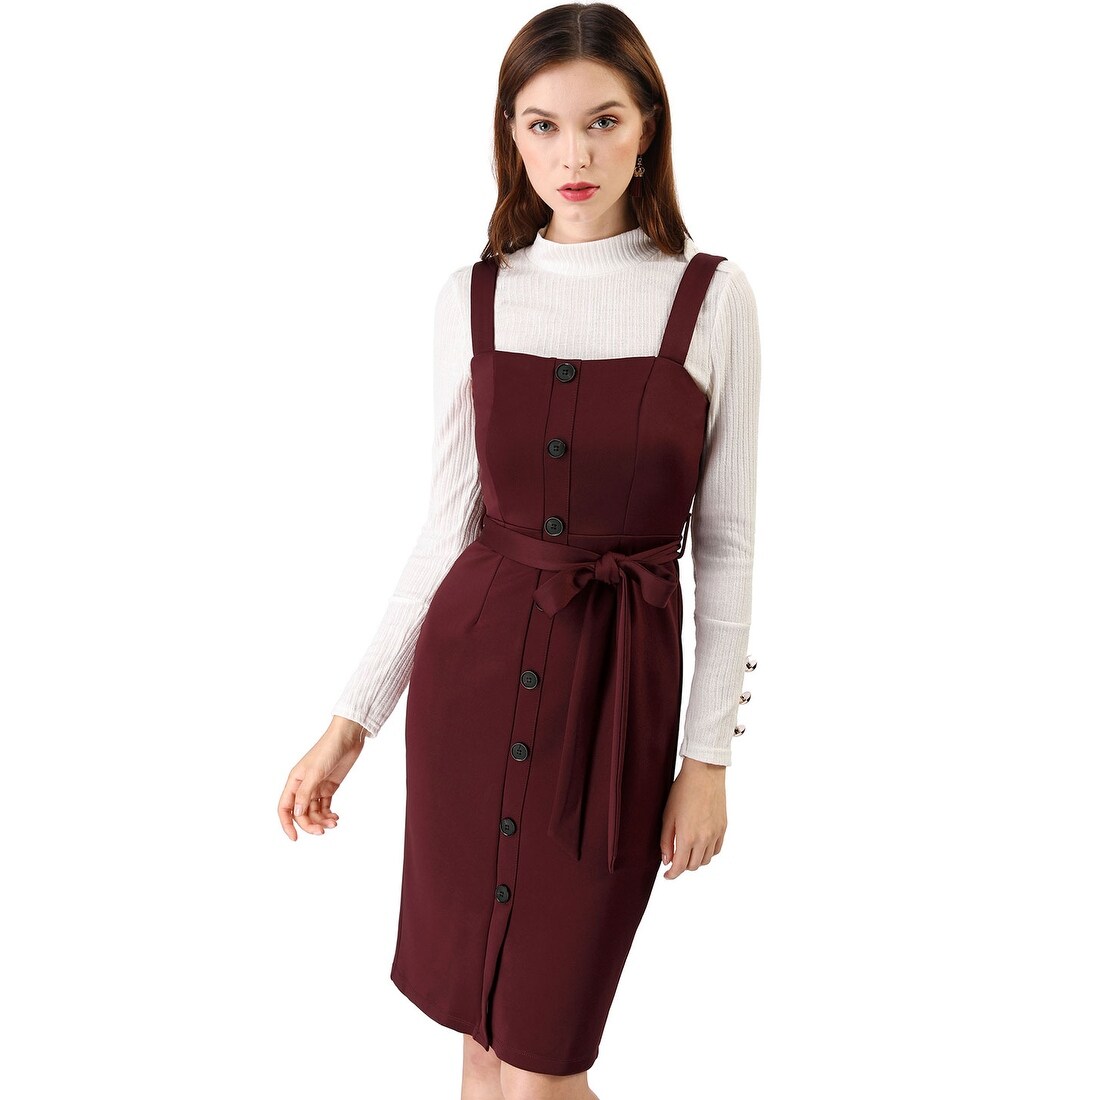 jumper dress with buttons